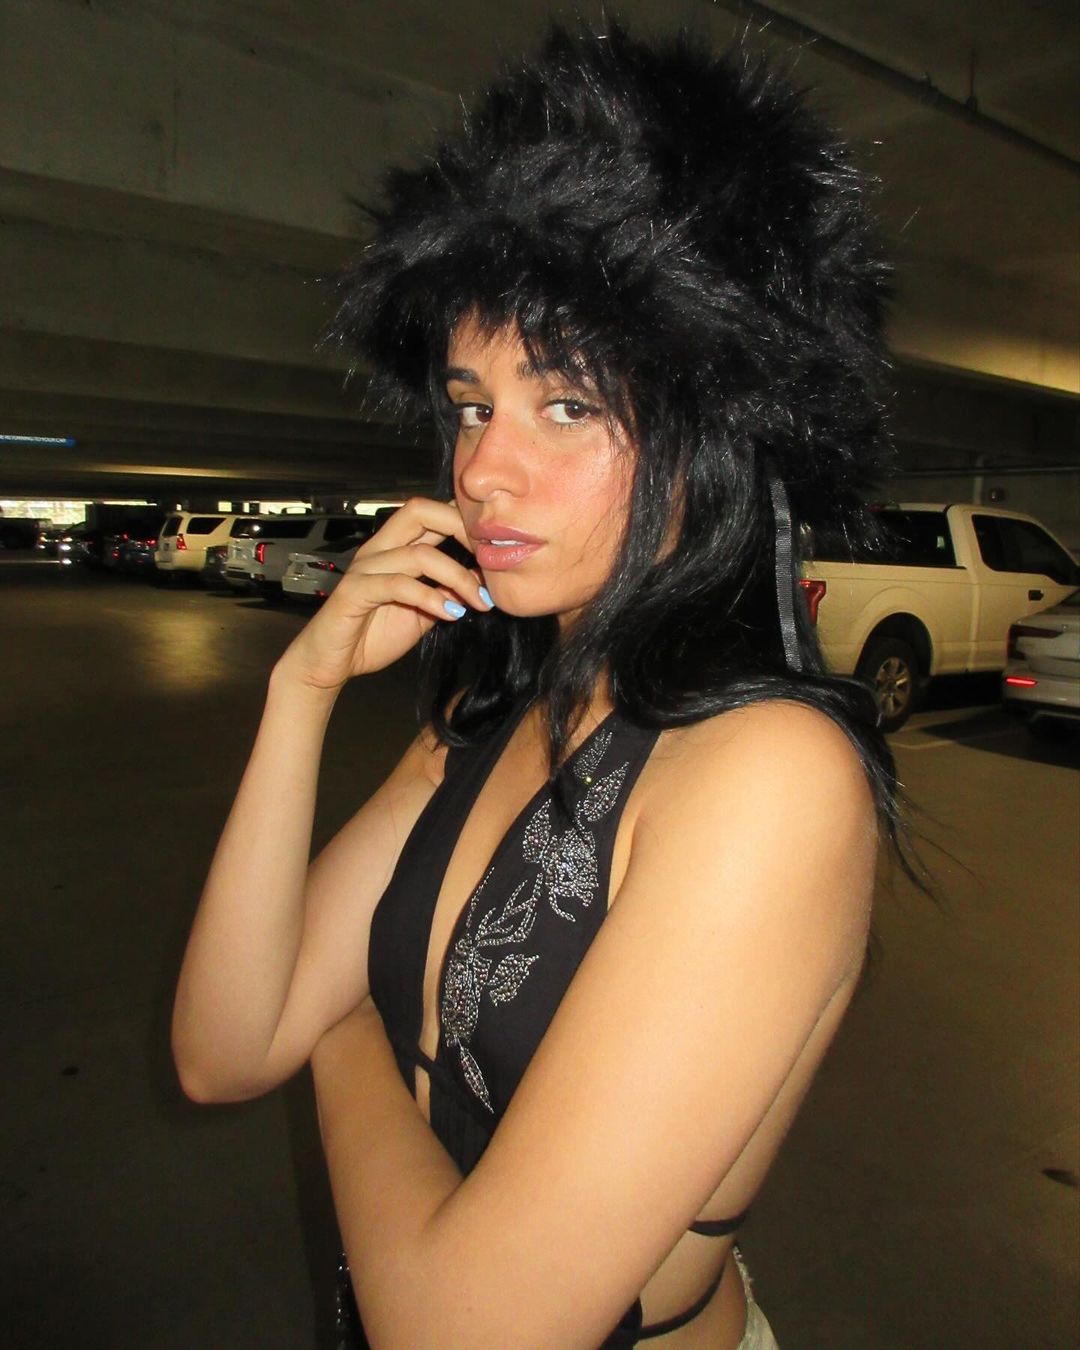 Camila Cabello Gets Cryptic in the Parking Garage!